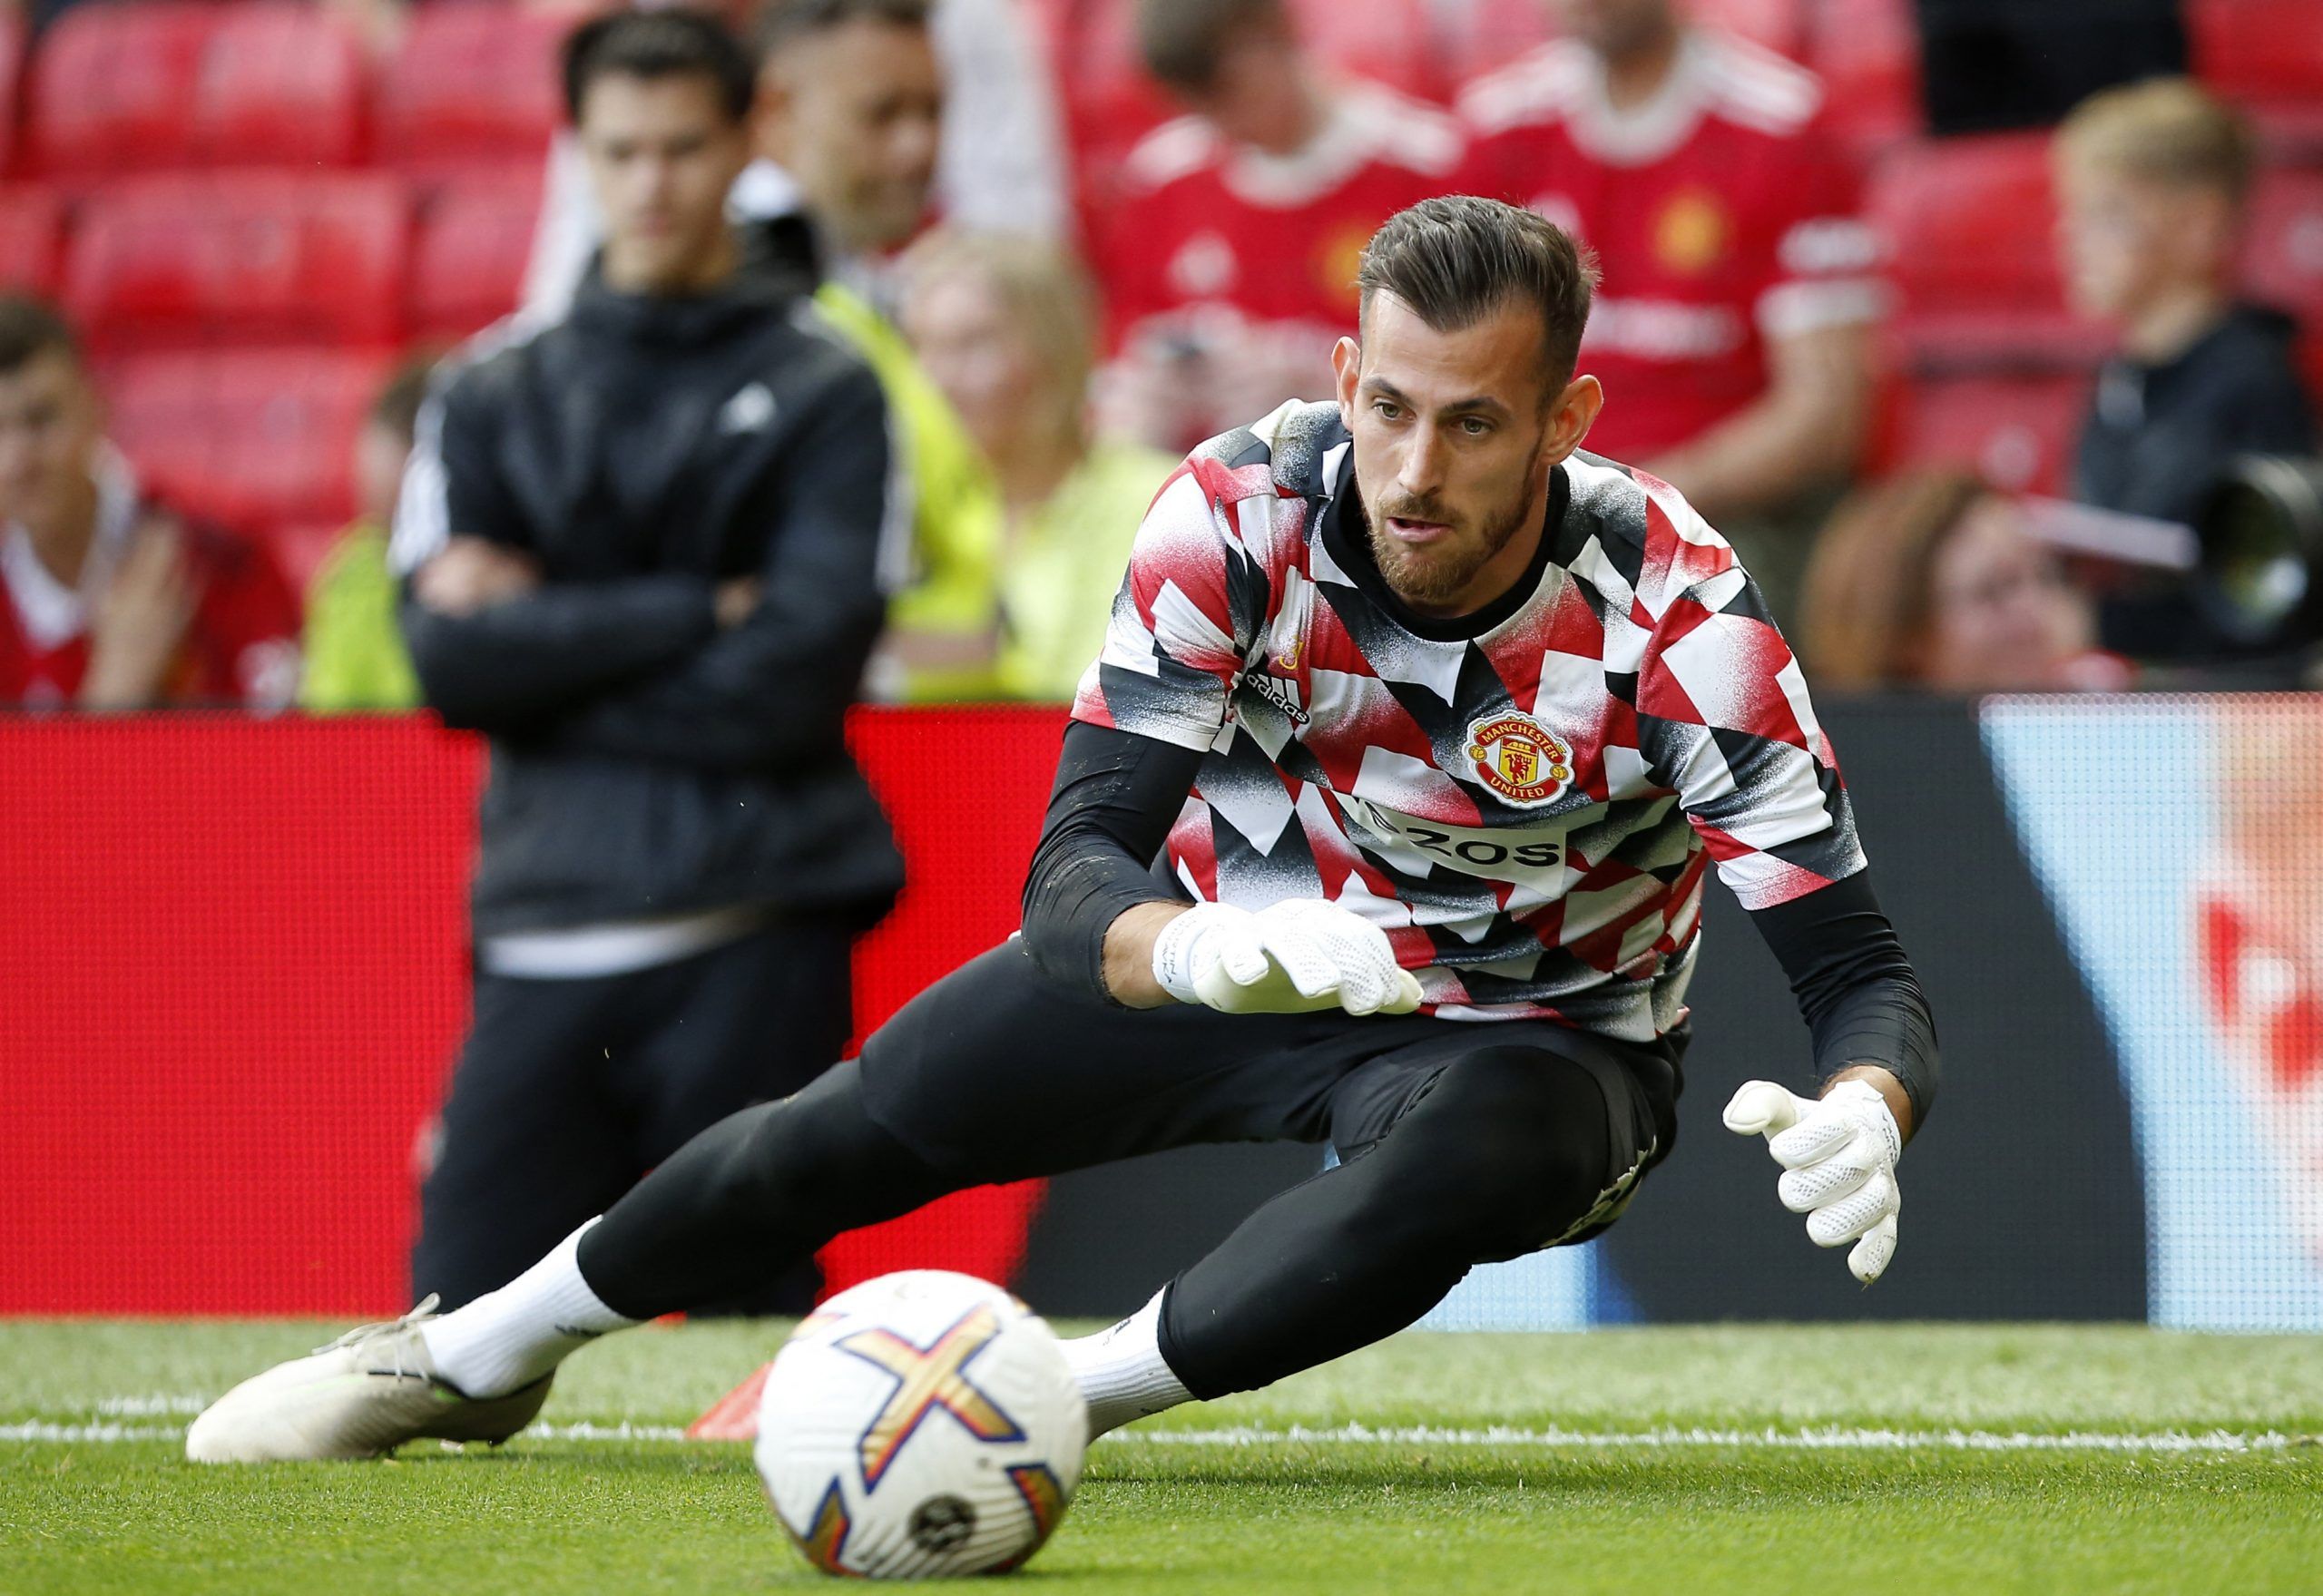 Soccer Football - Premier League - Manchester United v Arsenal - Old Trafford, Manchester, Britain - September 4, 2022 Manchester United's Martin Dubravka during the warm up before the match REUTERS/Craig Brough EDITORIAL USE ONLY. No use with unauthorized audio, video, data, fixture lists, club/league logos or 'live' services. Online in-match use limited to 75 images, no video emulation. No use in betting, games or single club /league/player publications.  Please contact your account representa